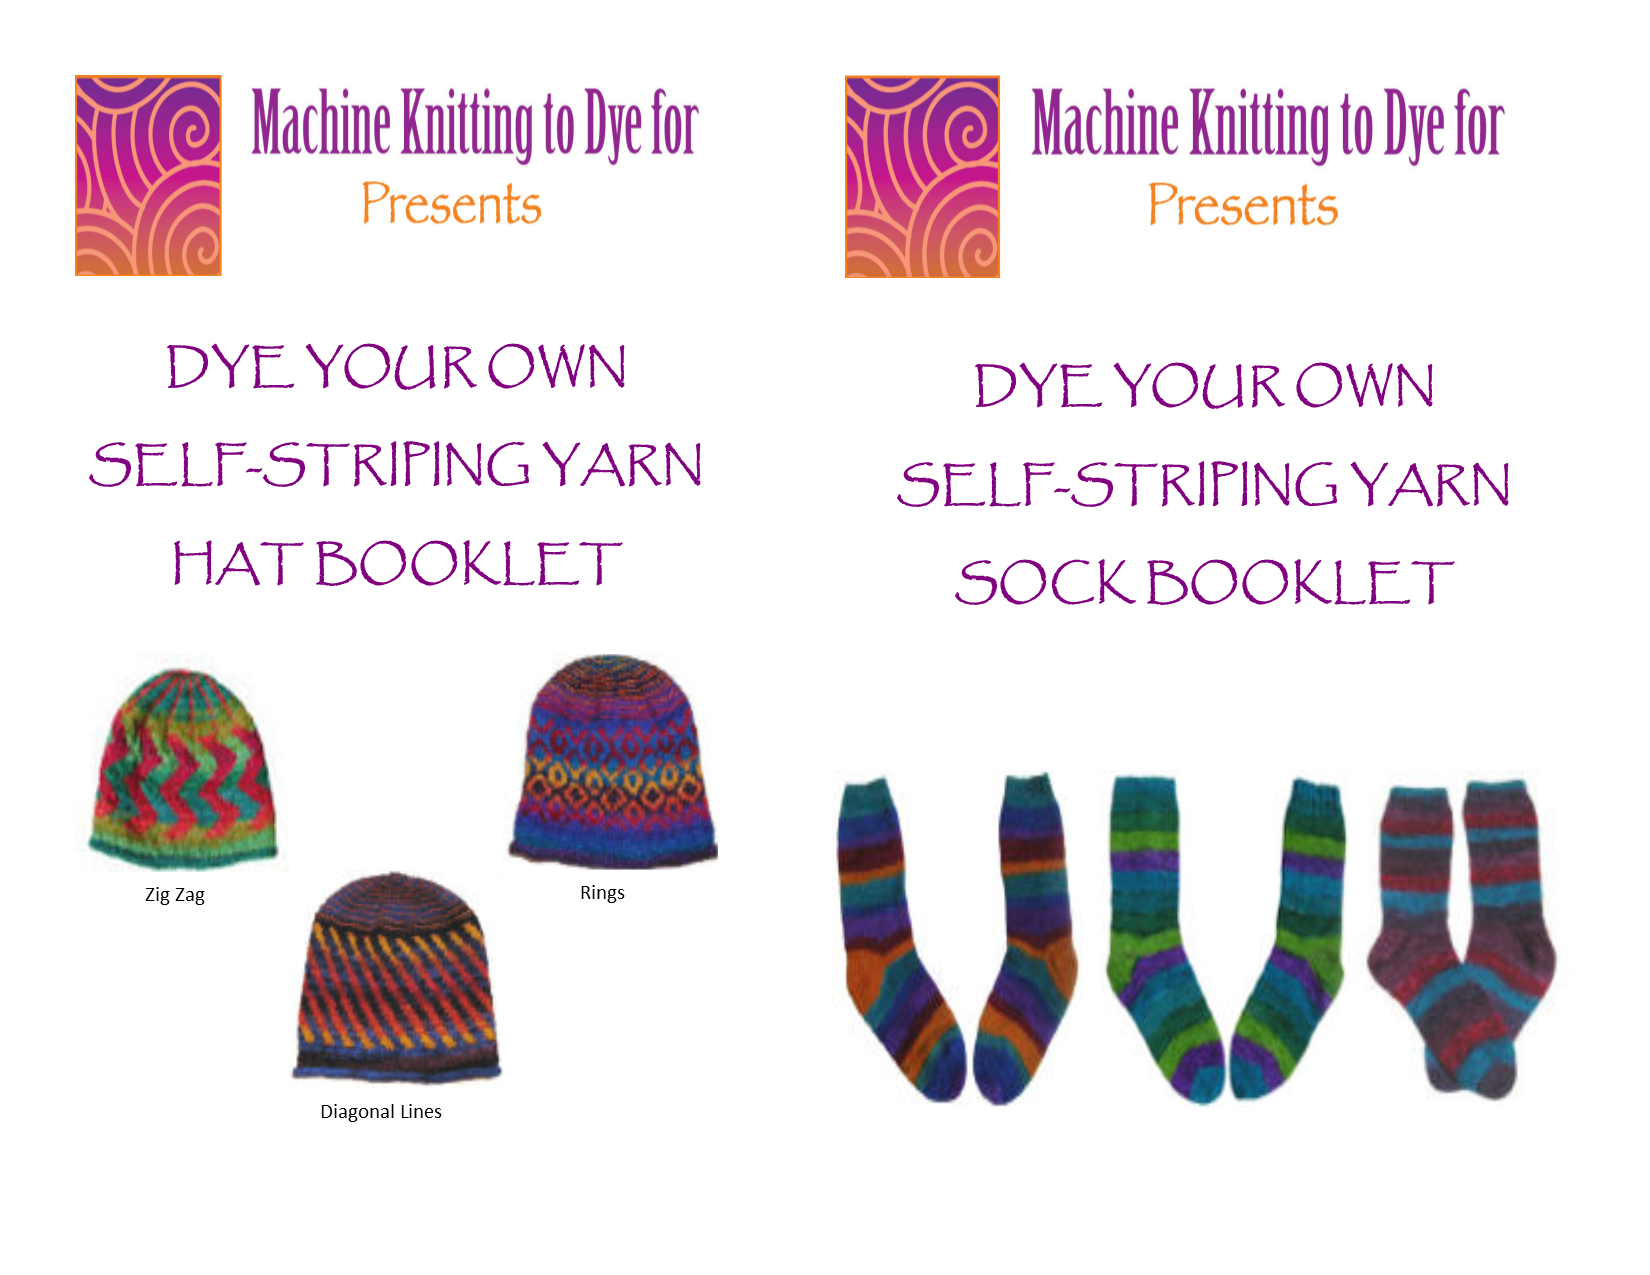 SOCK AND HAT BOOKLET COVERS